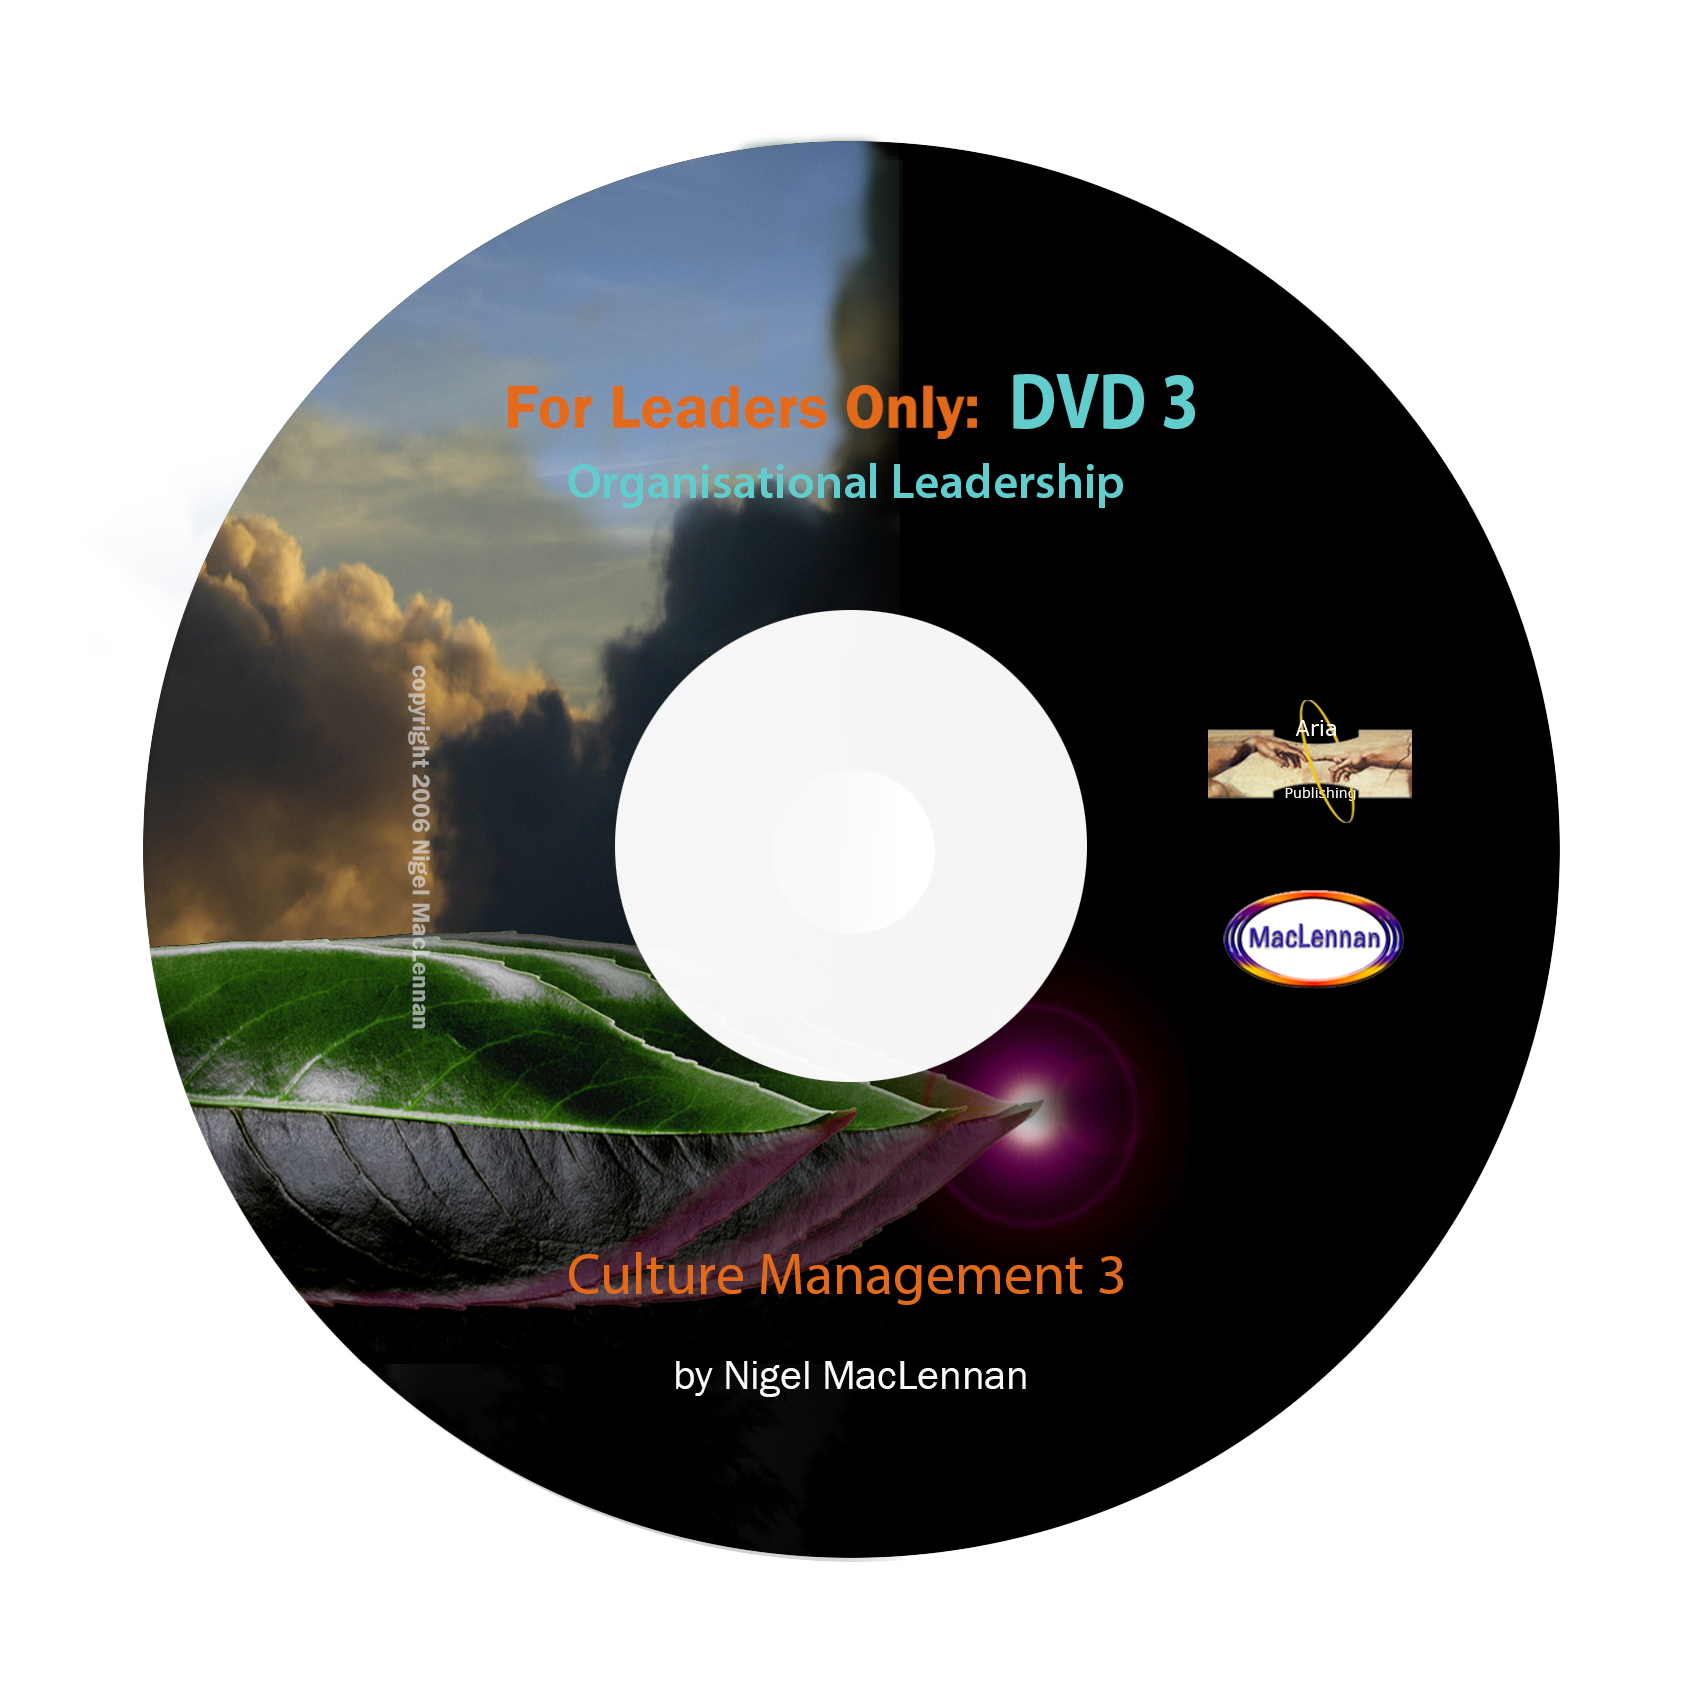 For Leaders Only - Culture Management 3 DVD